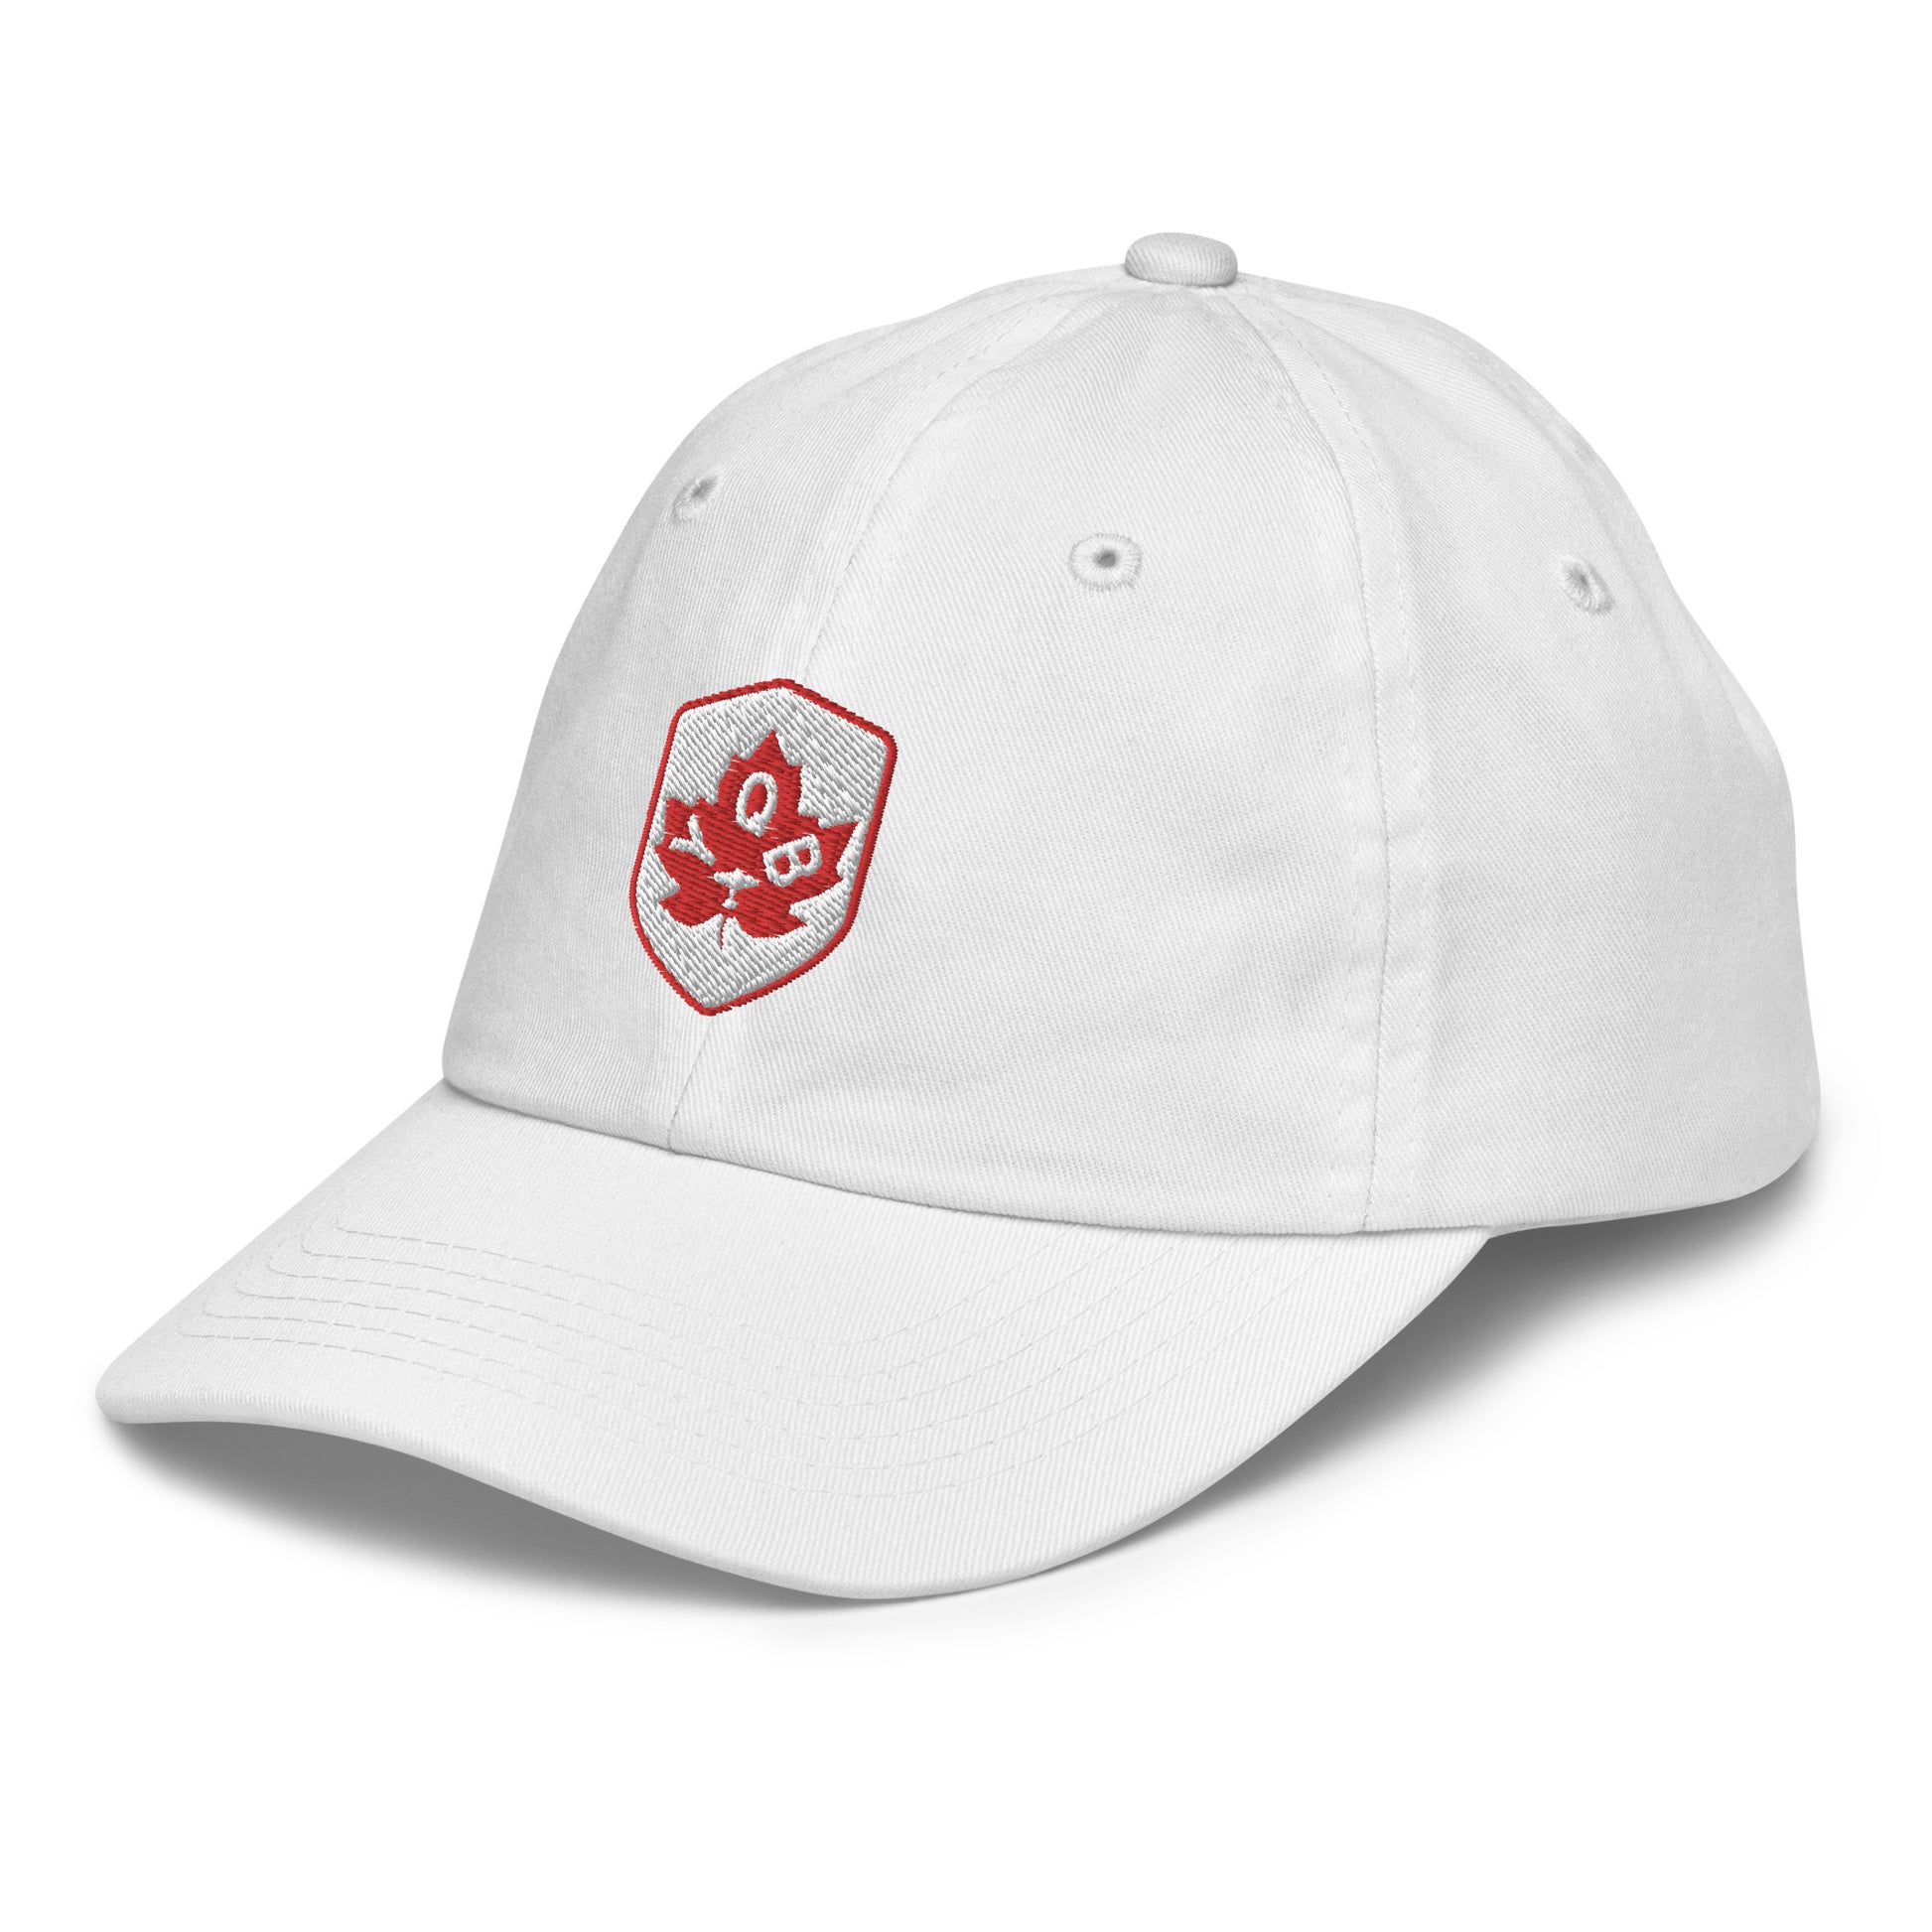 Maple Leaf Kid's Cap - Red/White • YQB Quebec City • YHM Designs - Image 27